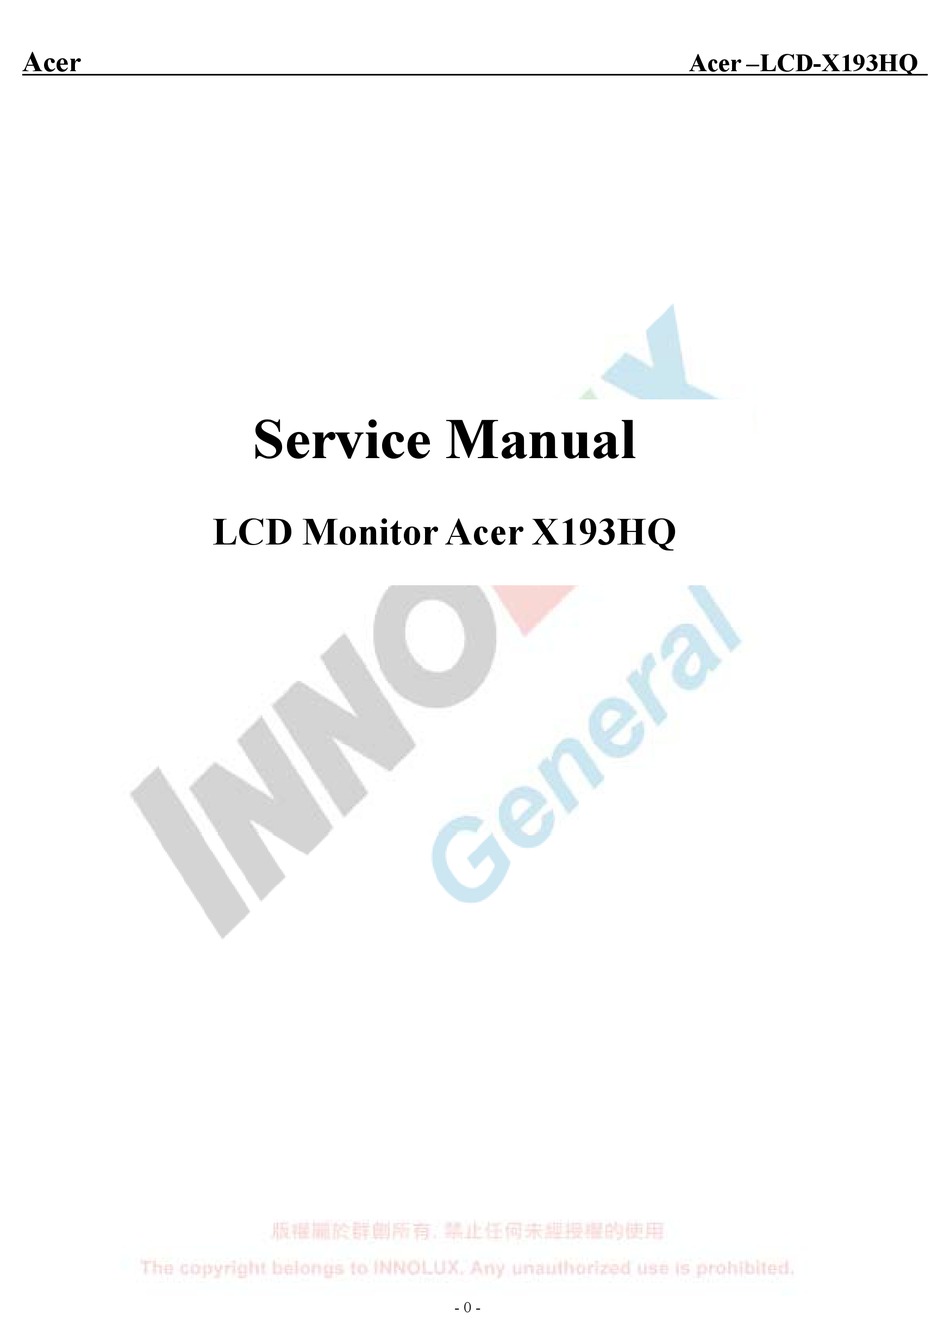 miracle shell Inferior Product Specification; Operation Specifications - Acer LCD-X193HQ Service  Manual [Page 4] | ManualsLib